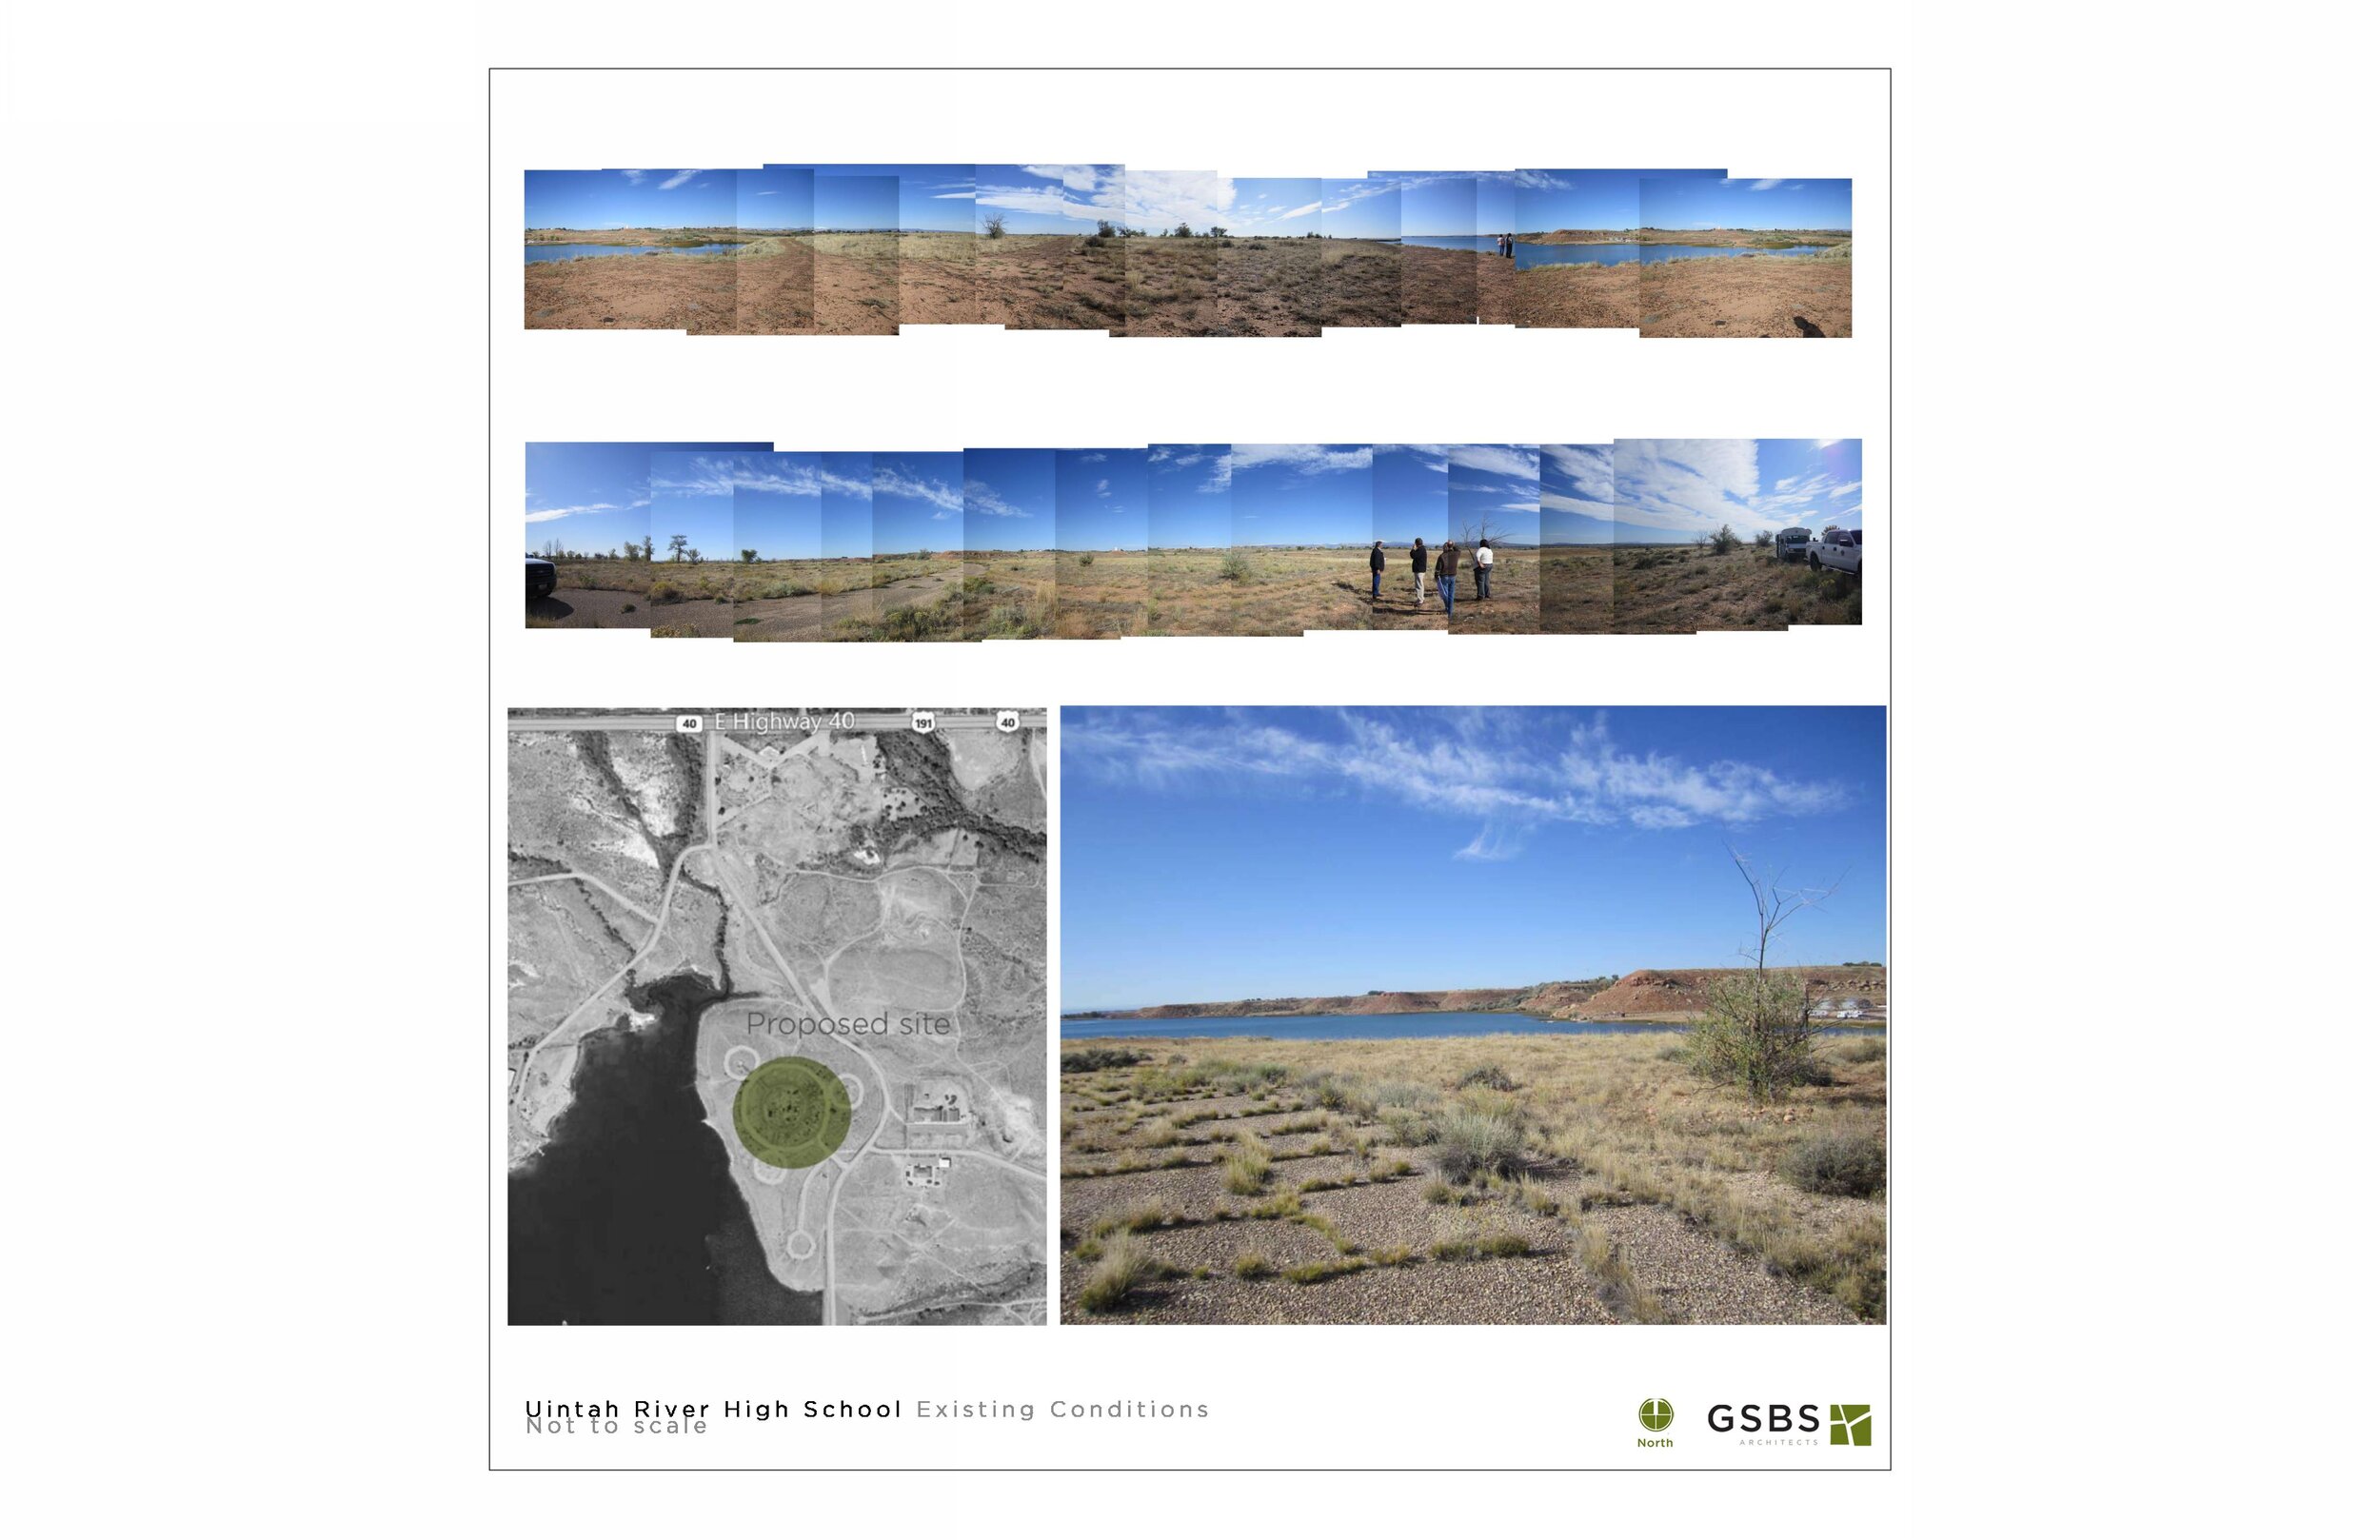  Photographic imagery of the area, landscape, and cultural opportunities around Uintah River High School 